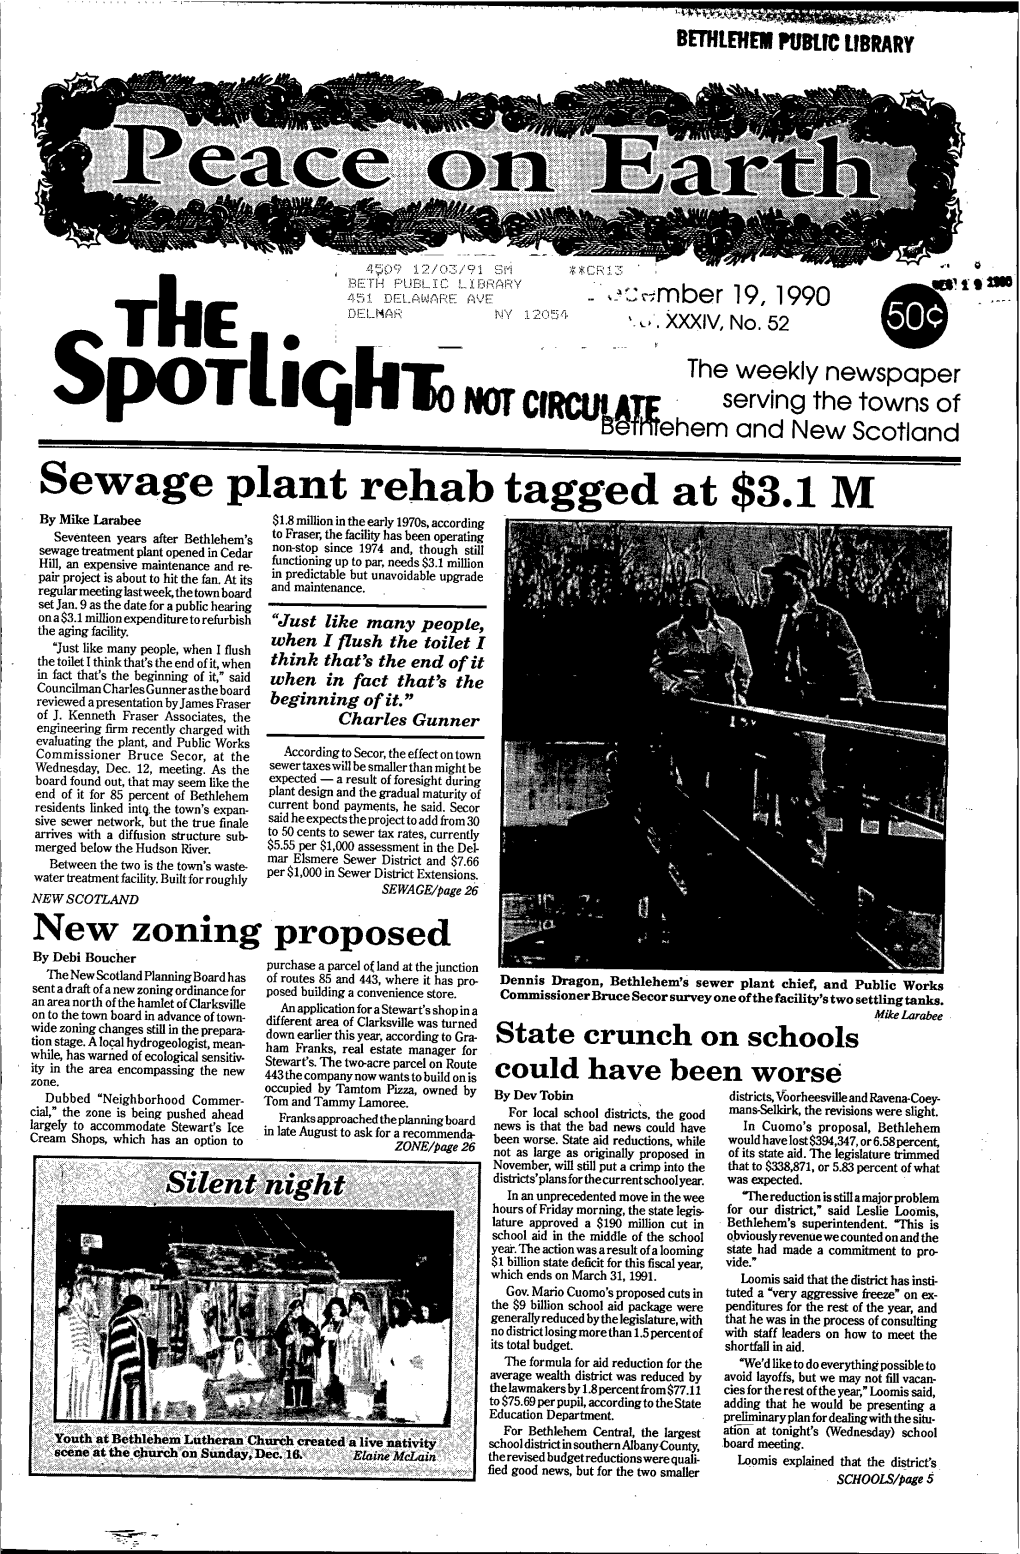 December 19,1990 -PAGE 7 D Focus on Faith BFI 'Welcomes' Inquiry Into Record (From Page 8) Editor, the Spotlight: Propriate Disciplinary Action Was Tune and Geography